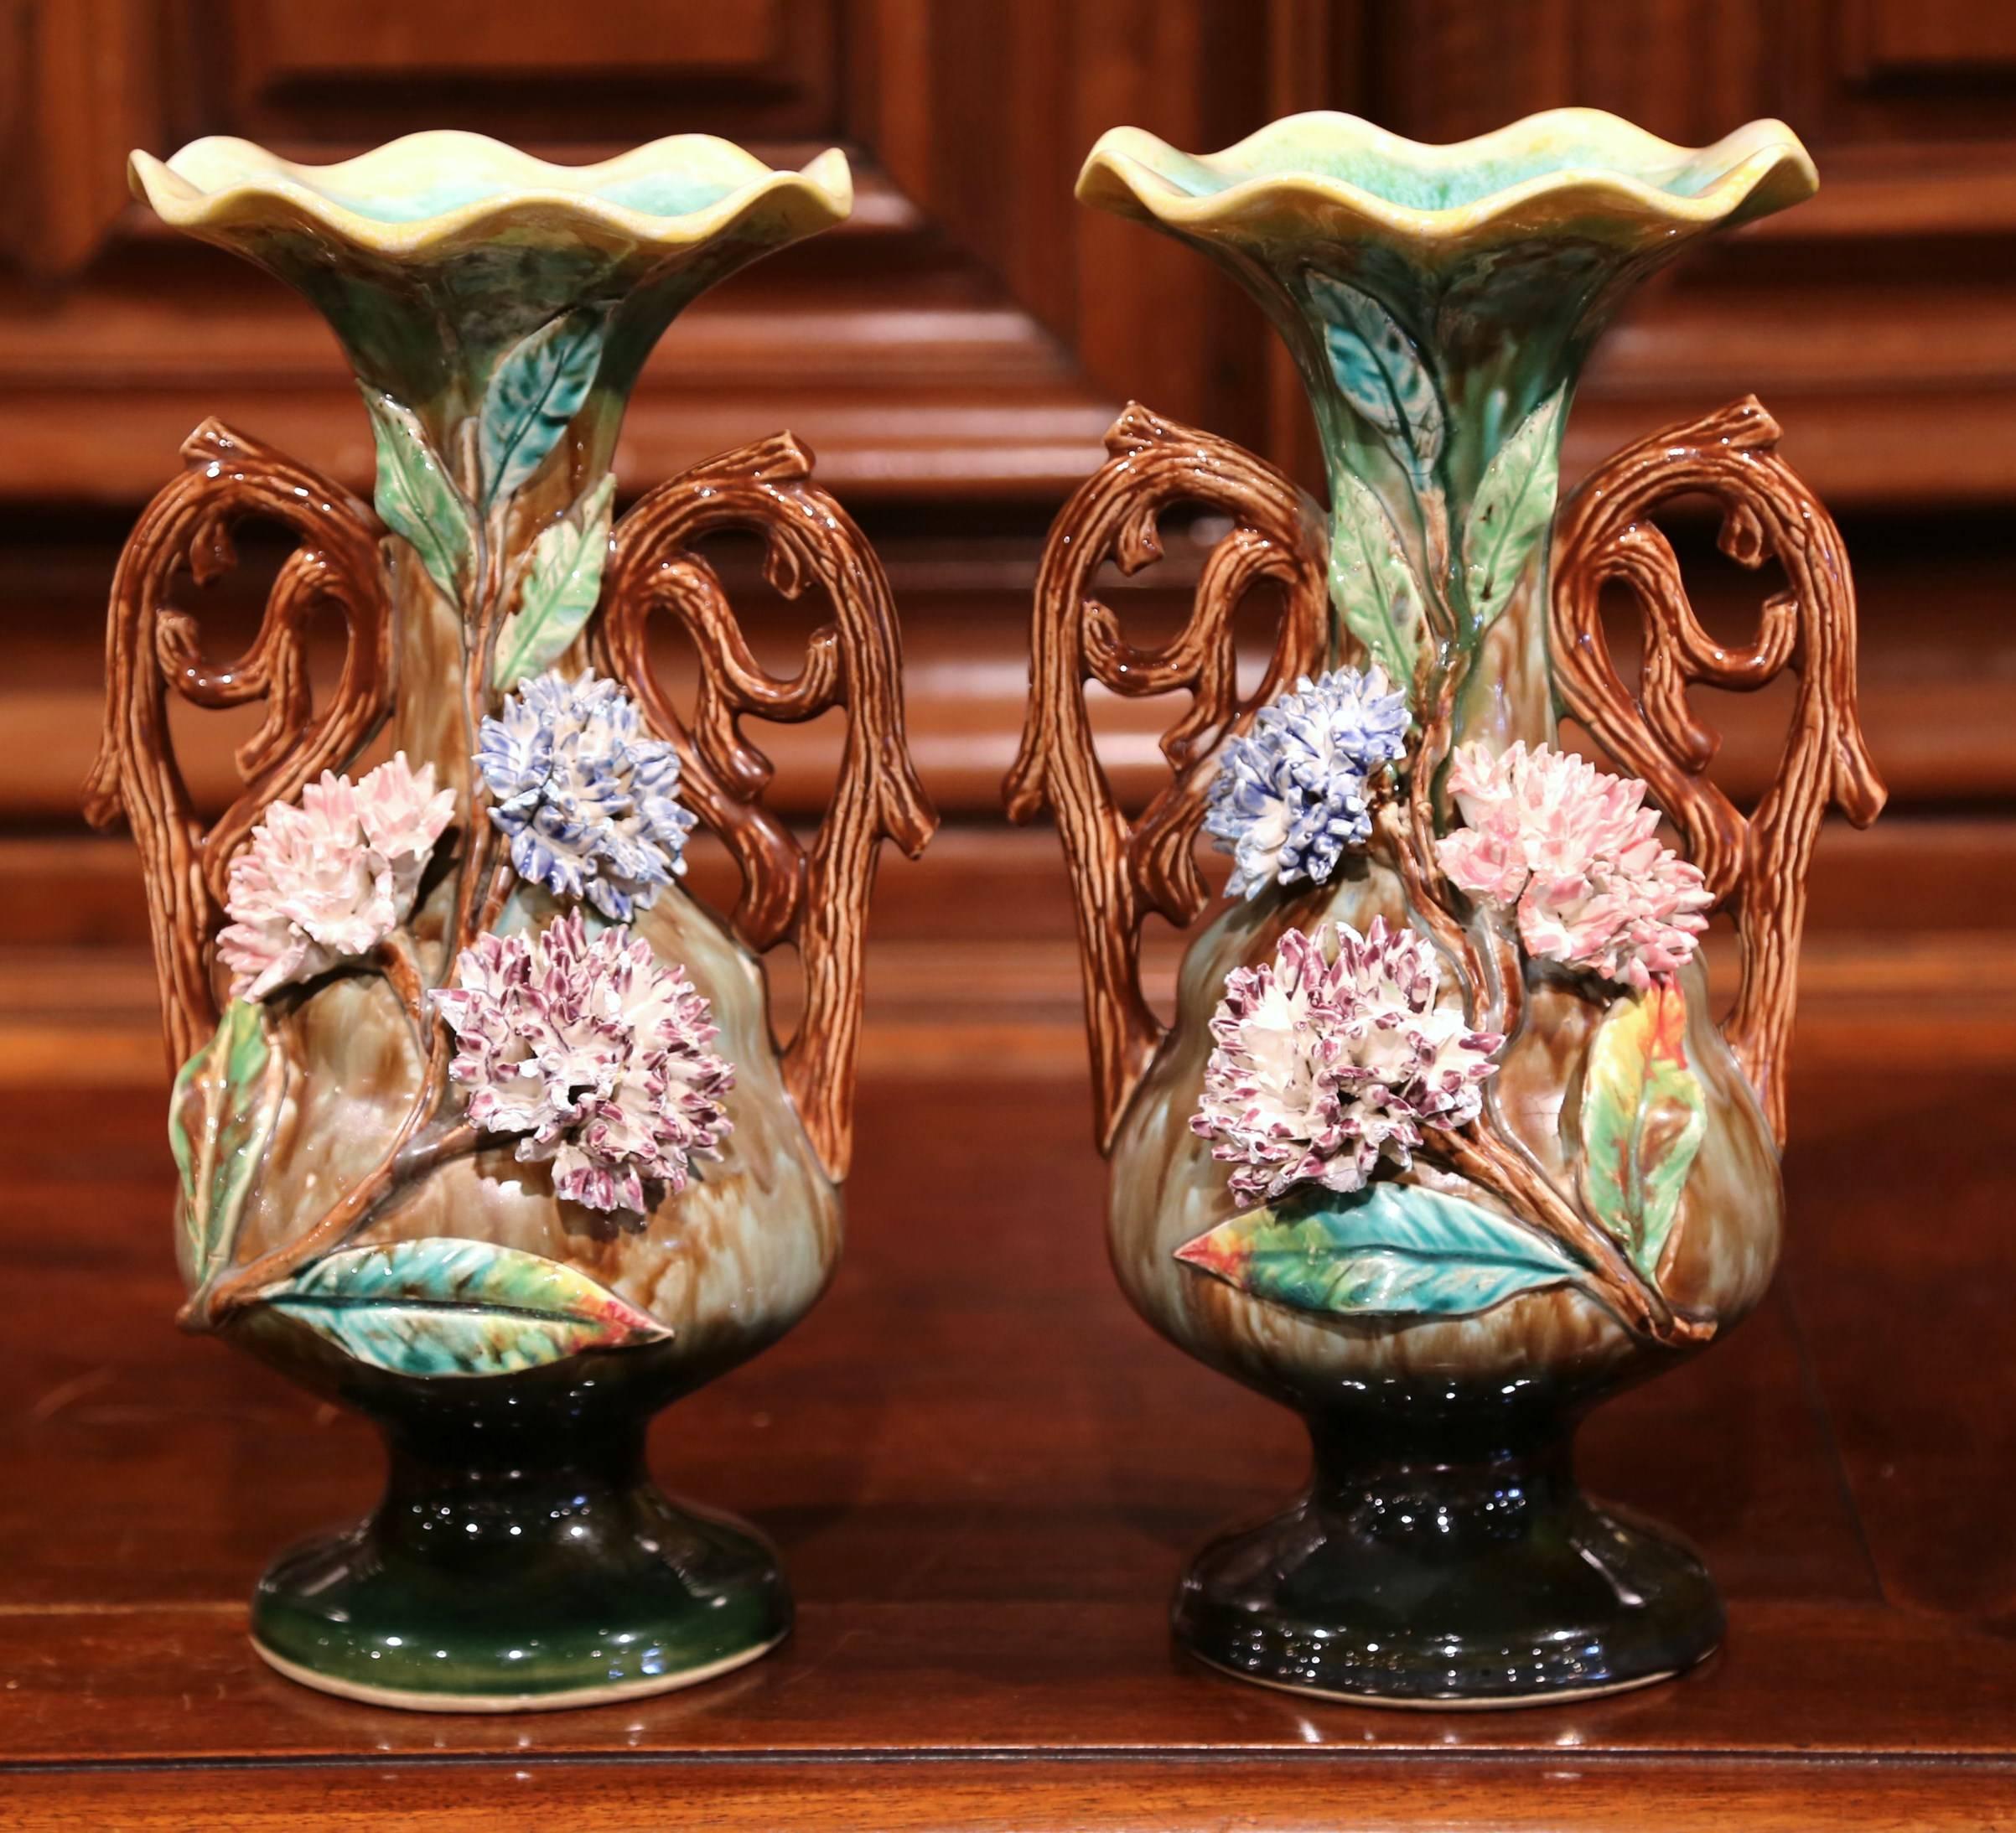 Pair of 19th Century French Hand-Painted Barbotine Vases with Flowers and Leaves 1